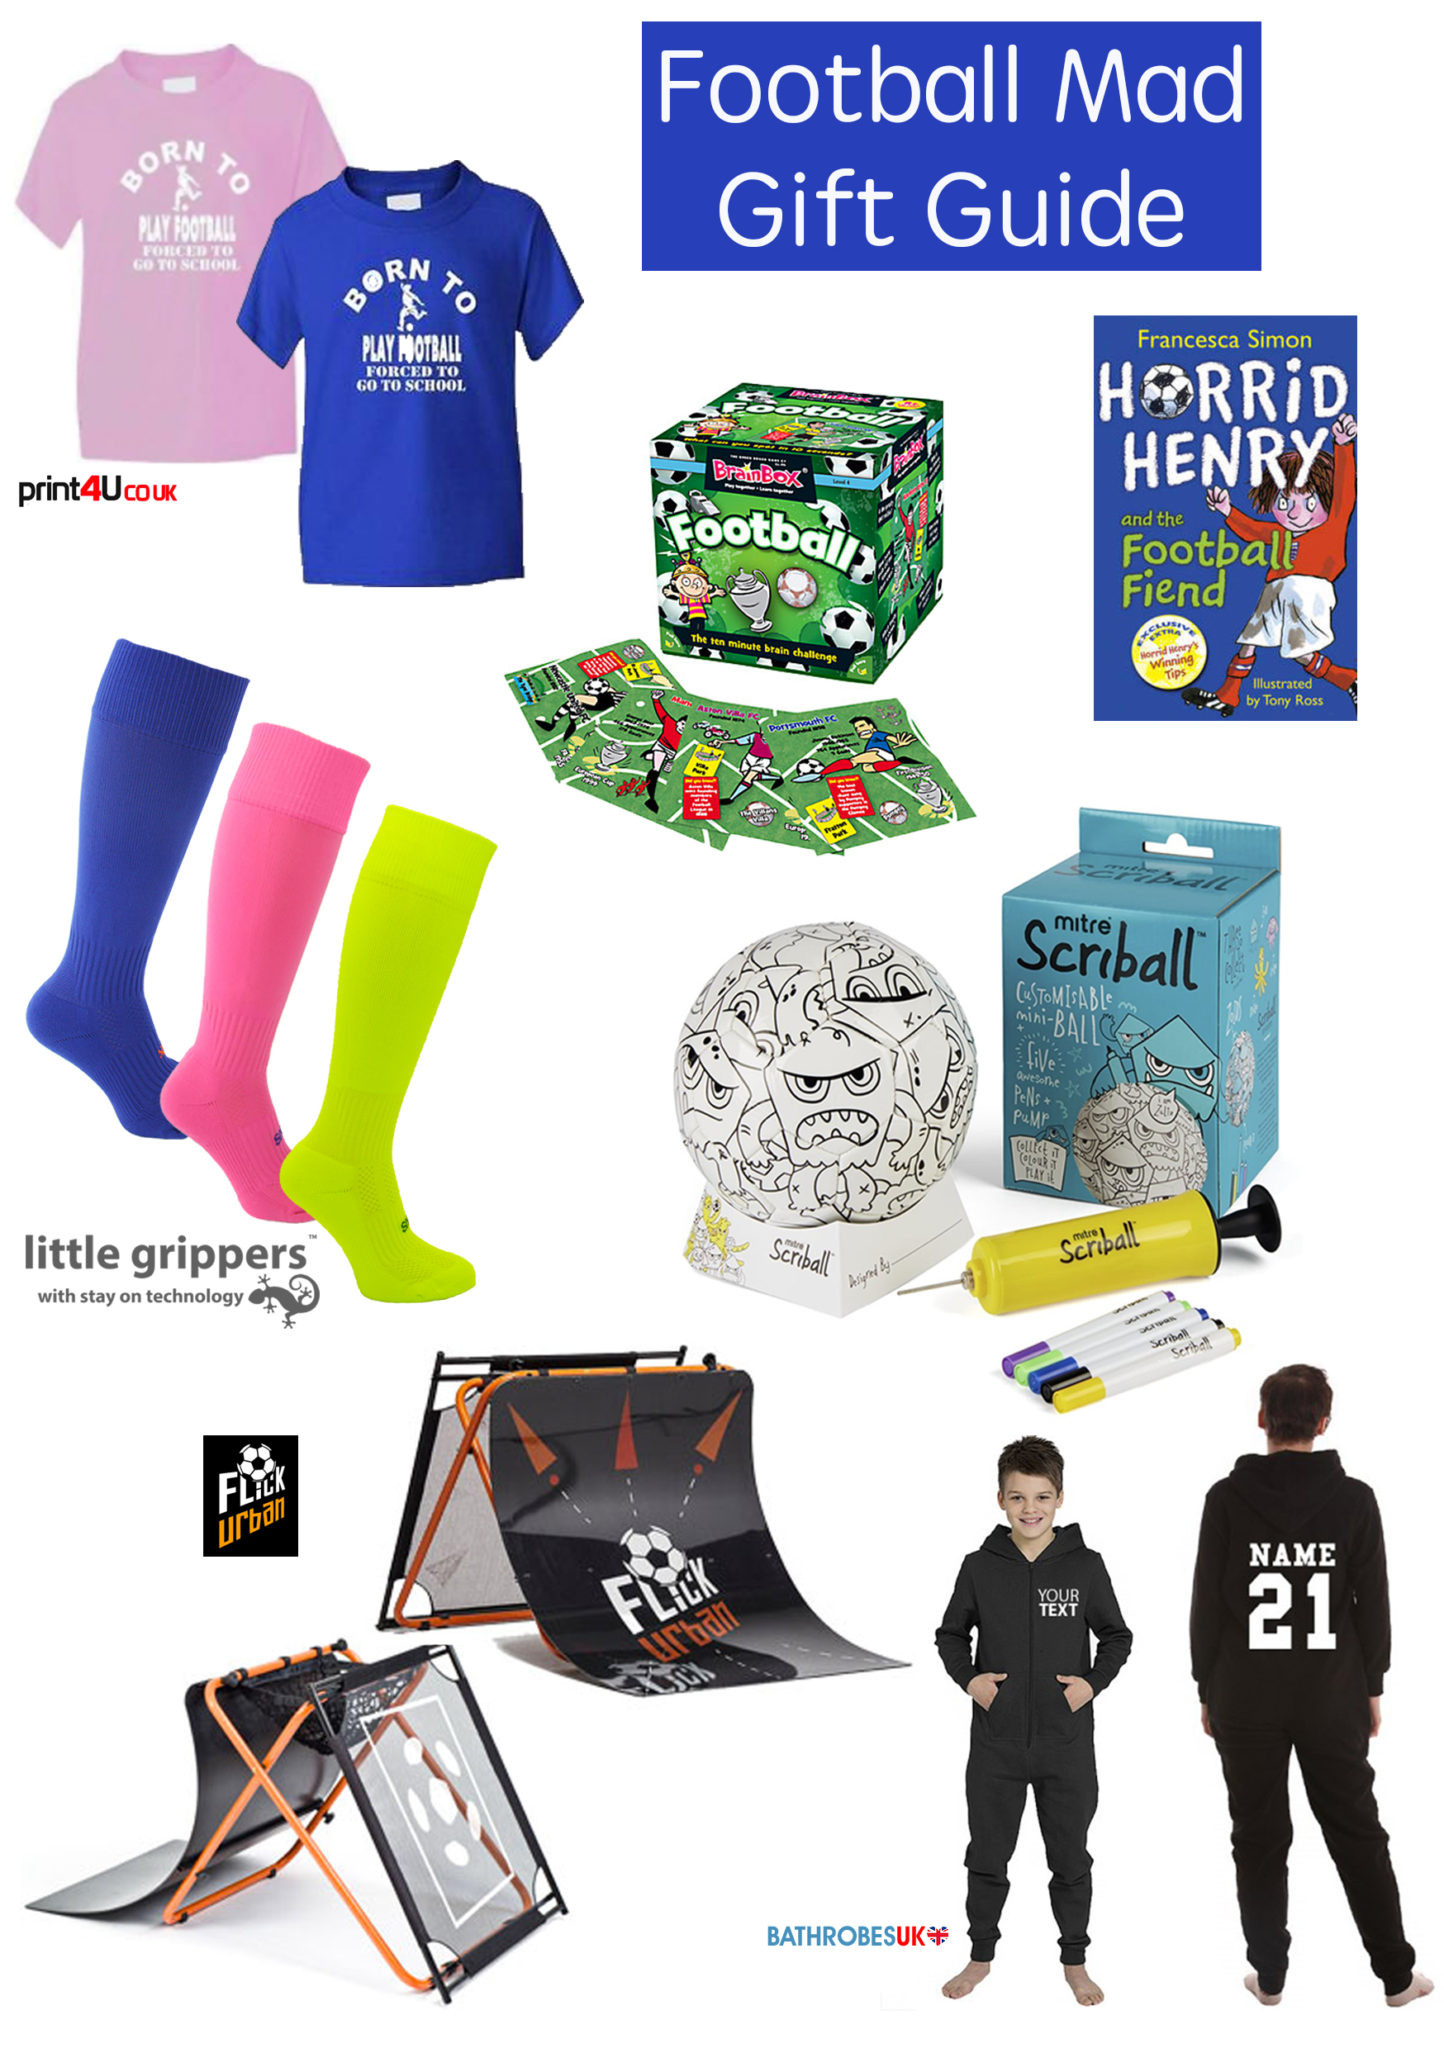 Football Gifts For Kids
 Football Mad Kids Here are our Top Gift Ideas